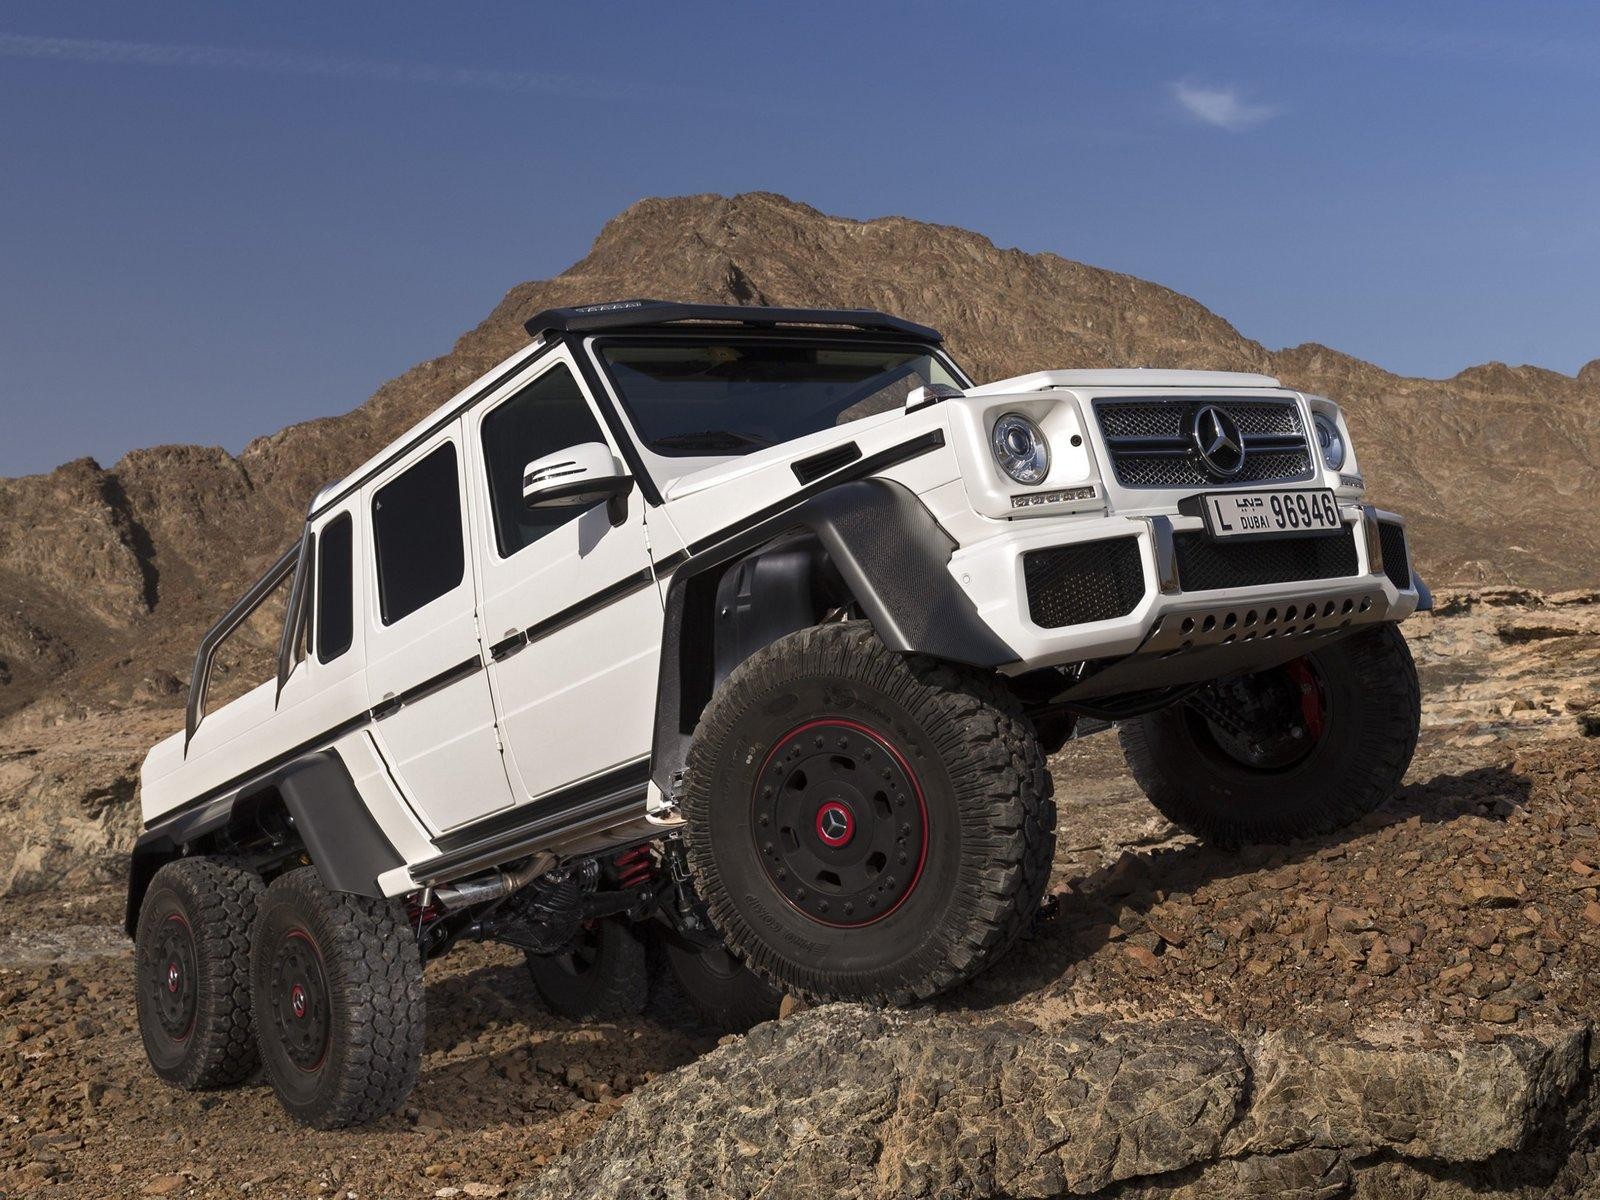 Mercedes Benz G63 Amg 6x6 Specifications Photos Videos Overview